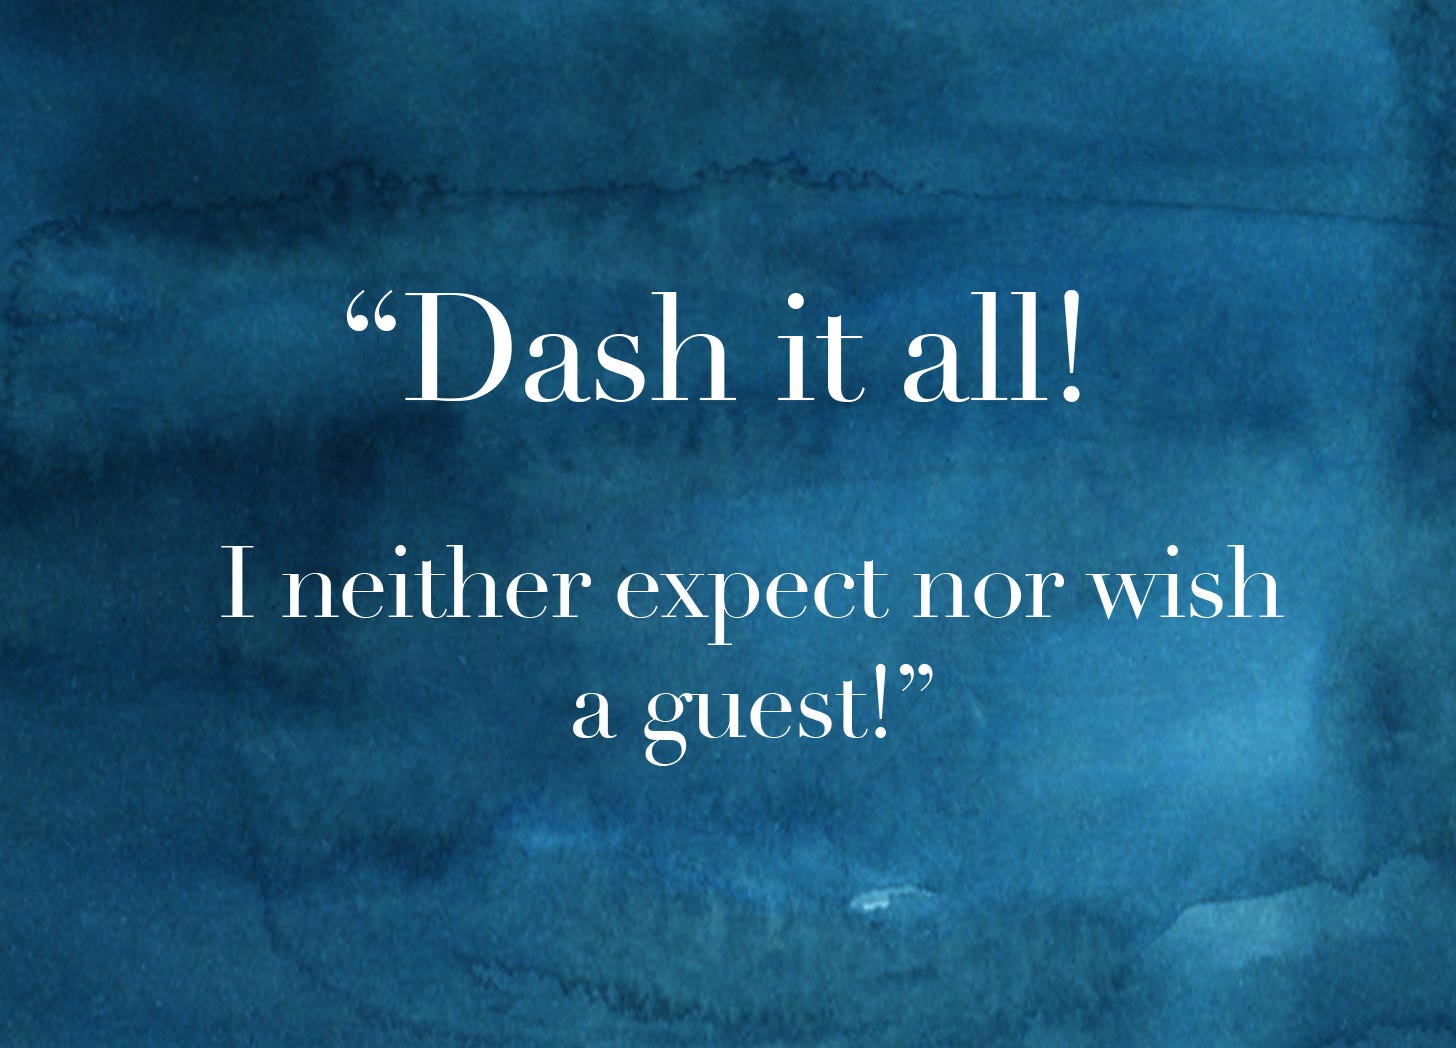 Dash it all! I neither expect nor wish a guest!